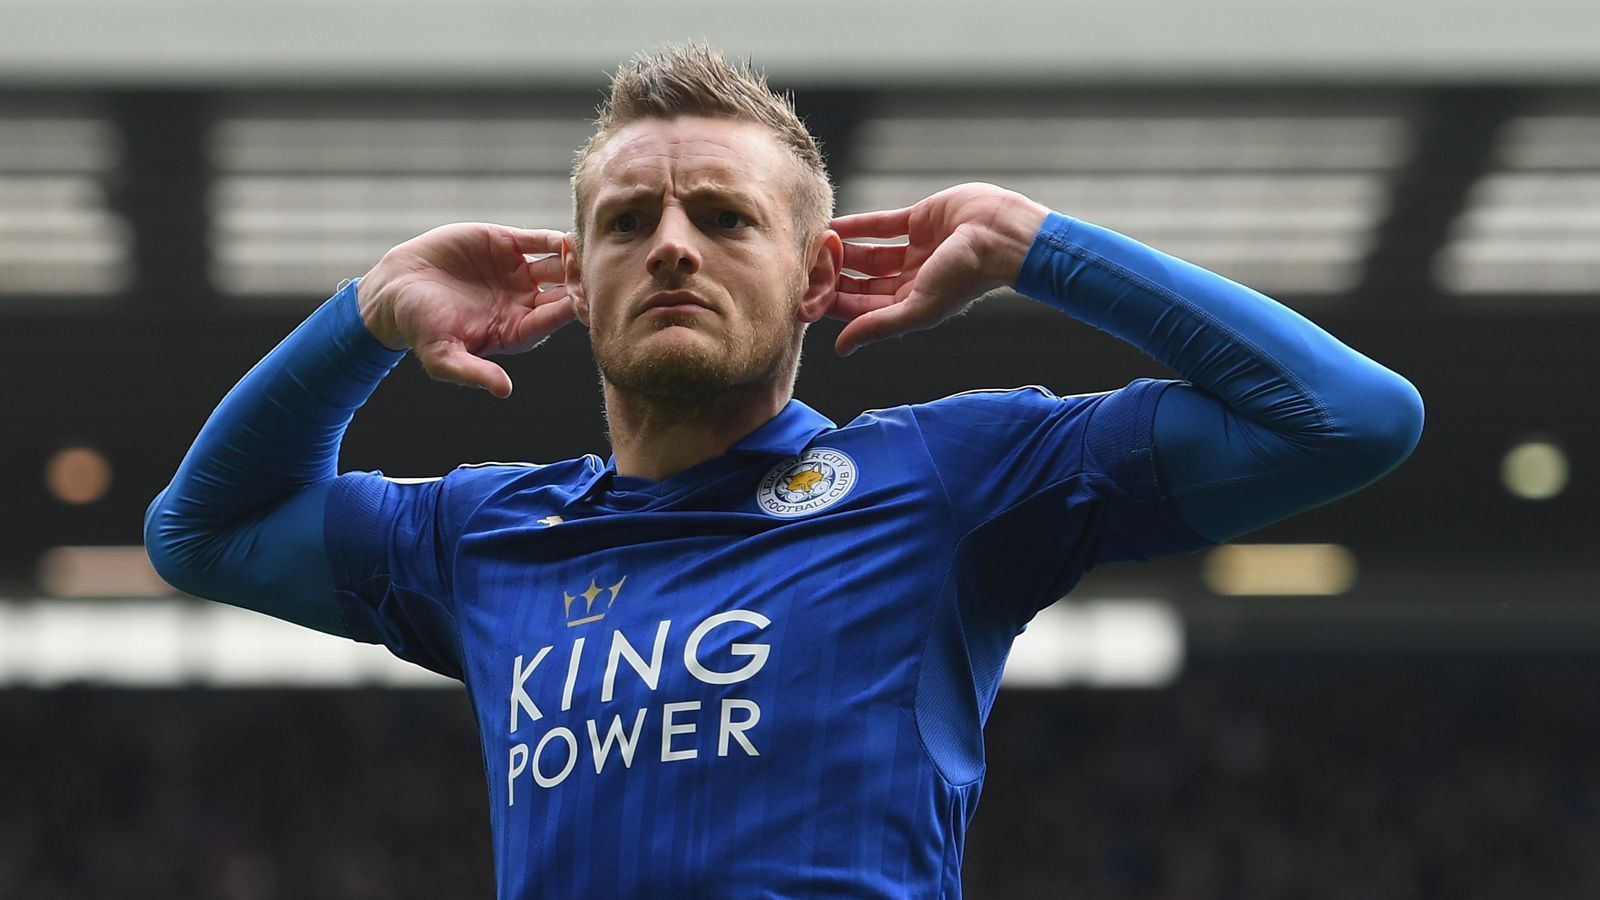 
                <strong>Premier League (England)</strong><br>
                1. Jamie Vardy (Leicester City) 19 Tore2. Pierre-Emerick Aubameyang (Arsenal) 17 Tore3. Mohamed Salah (FC Liverpool) 16 Tore
              